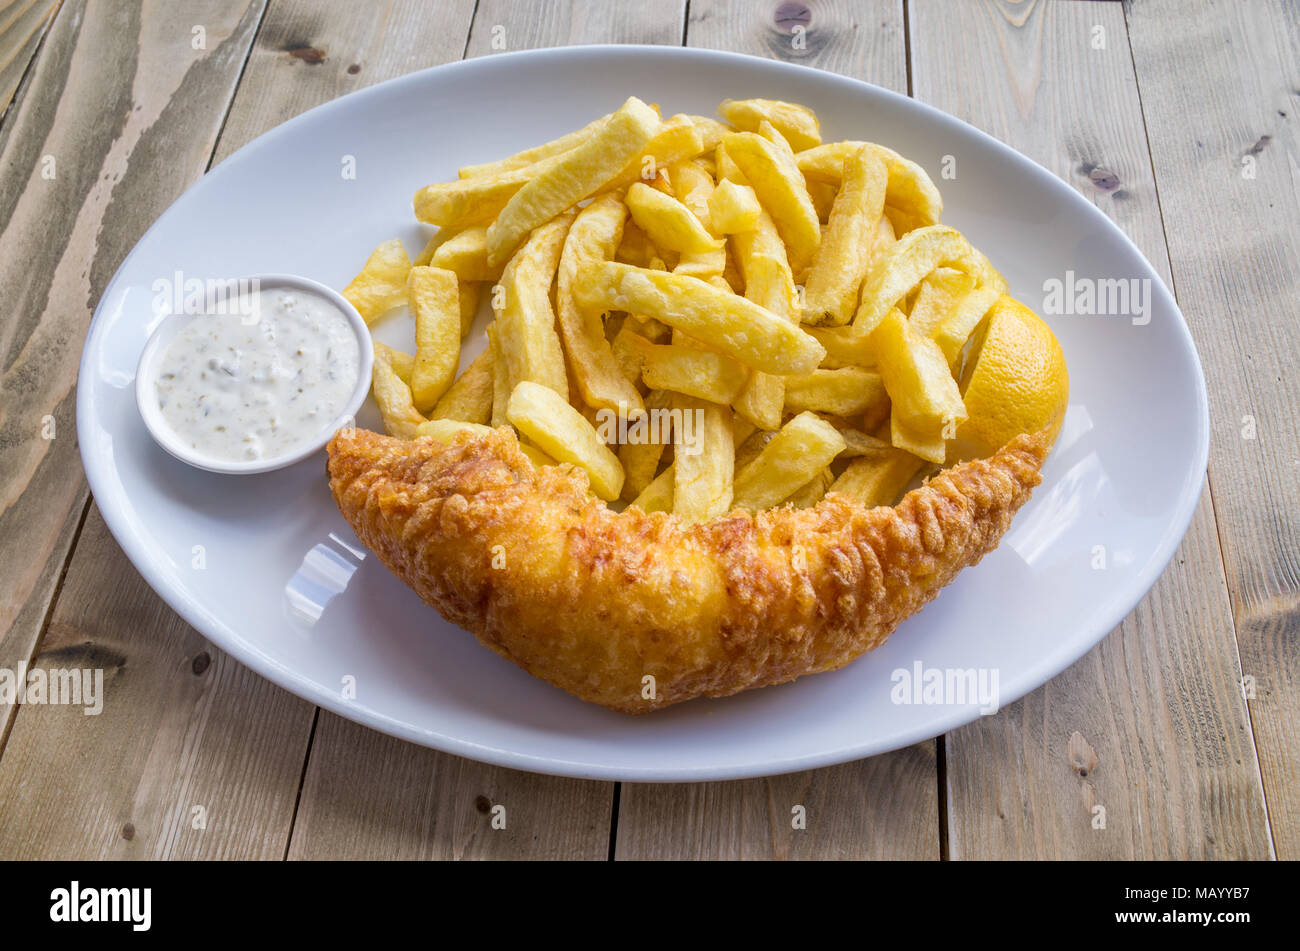 Plate of battered cod and chips, UK Stock Photo